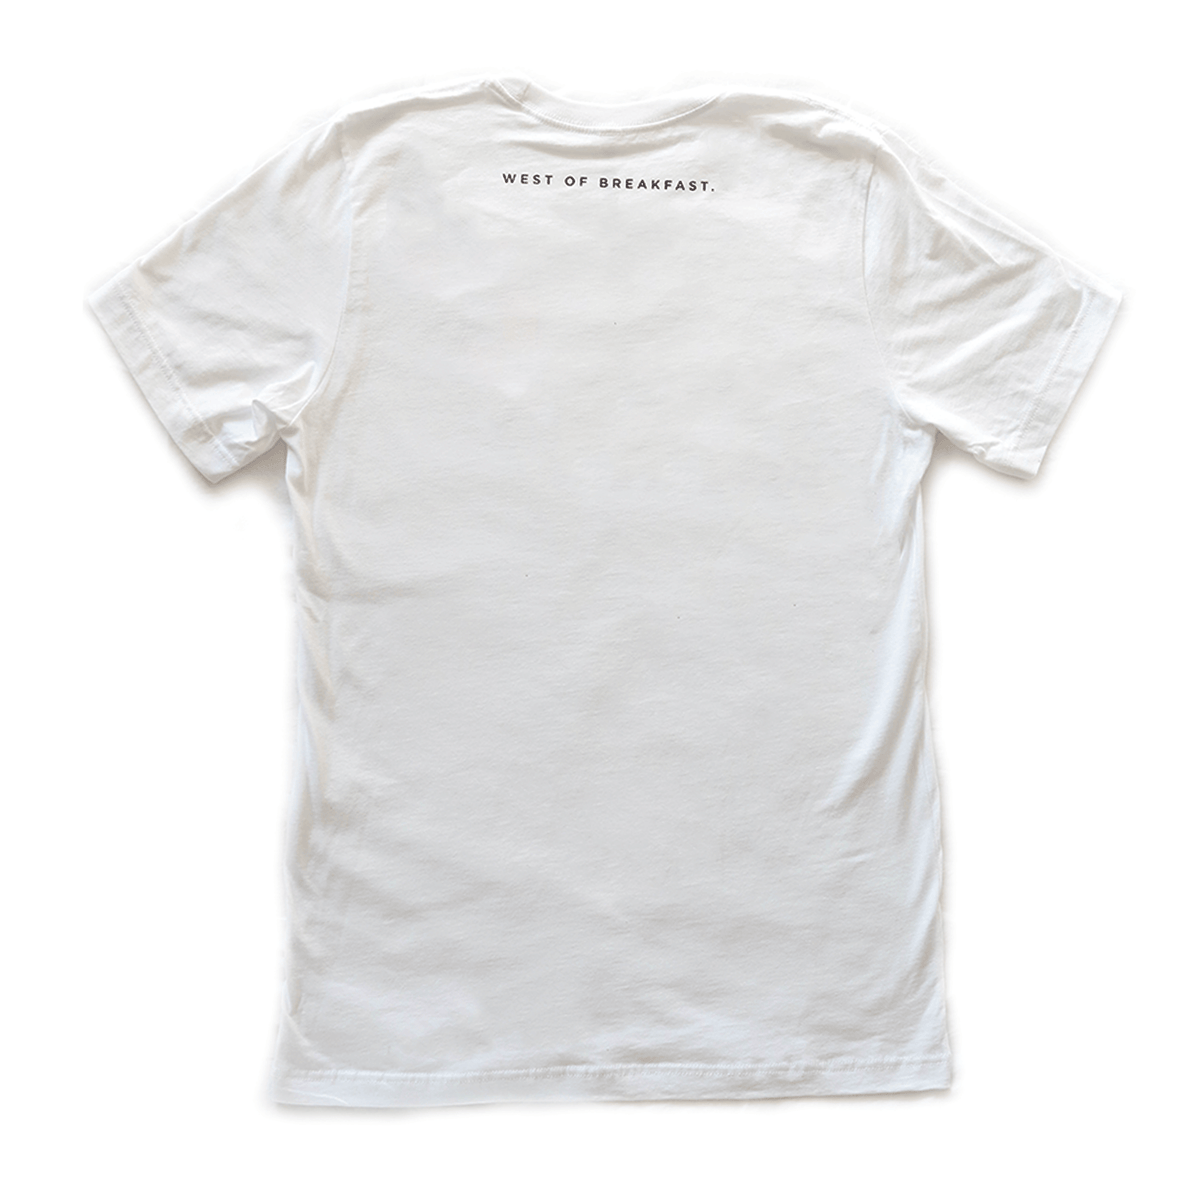 The Pajama Party Tee. – West of Breakfast